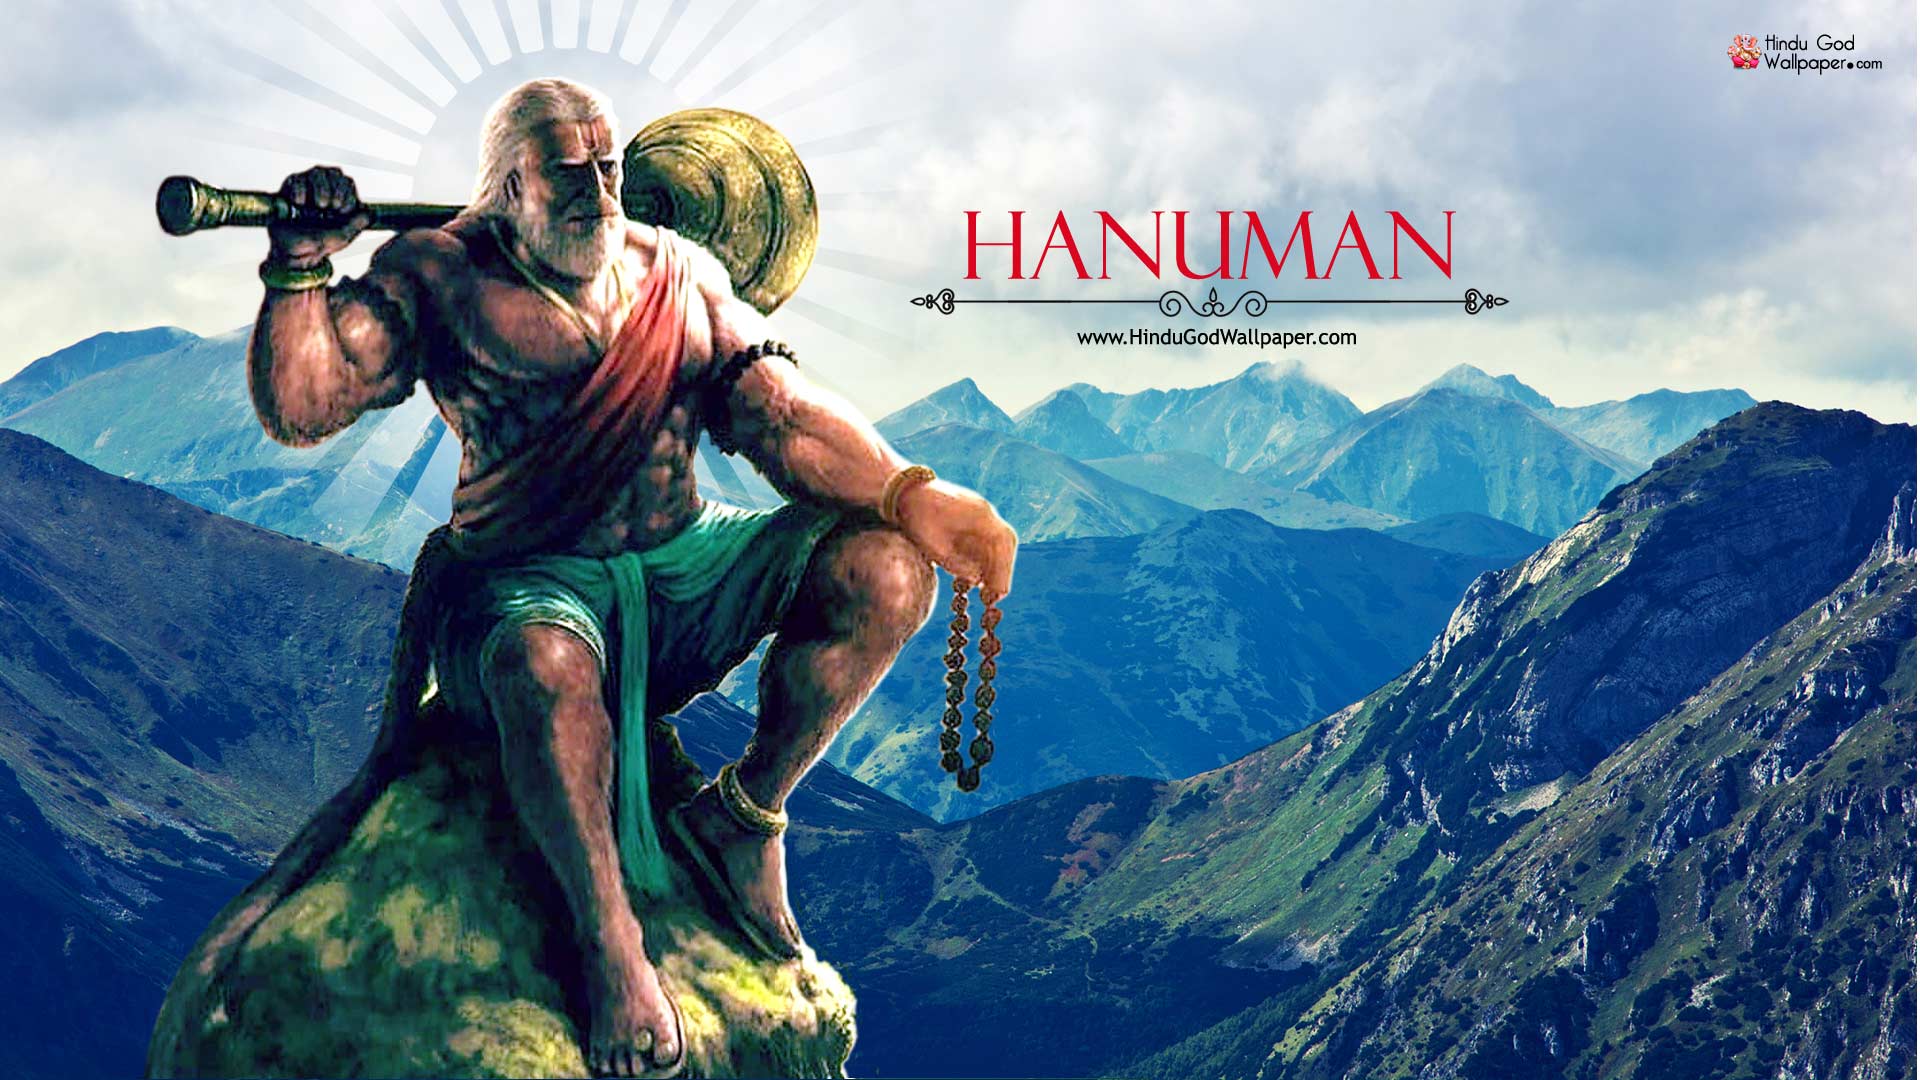 1080p Angry Hanuman Wallpaper Hd Images Photos Download The 2018 fifa world cup was the 21st fifa world cup an international football tournament contested by the mens national teams of the member associations of fifa once every four years. 1080p angry hanuman wallpaper hd images